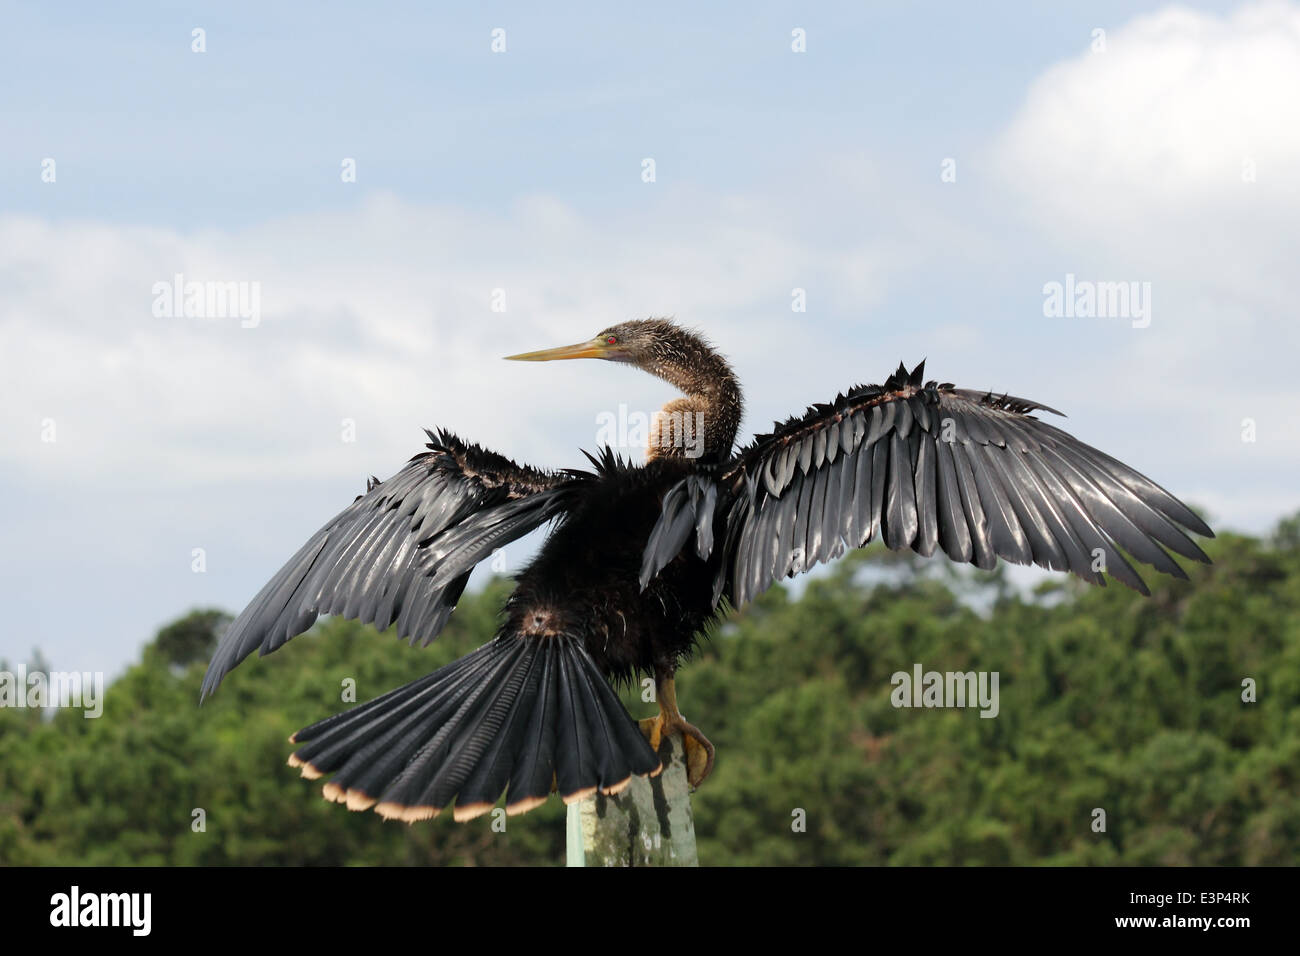 An Anhinga dries its wings against a blue sky. Stock Photo